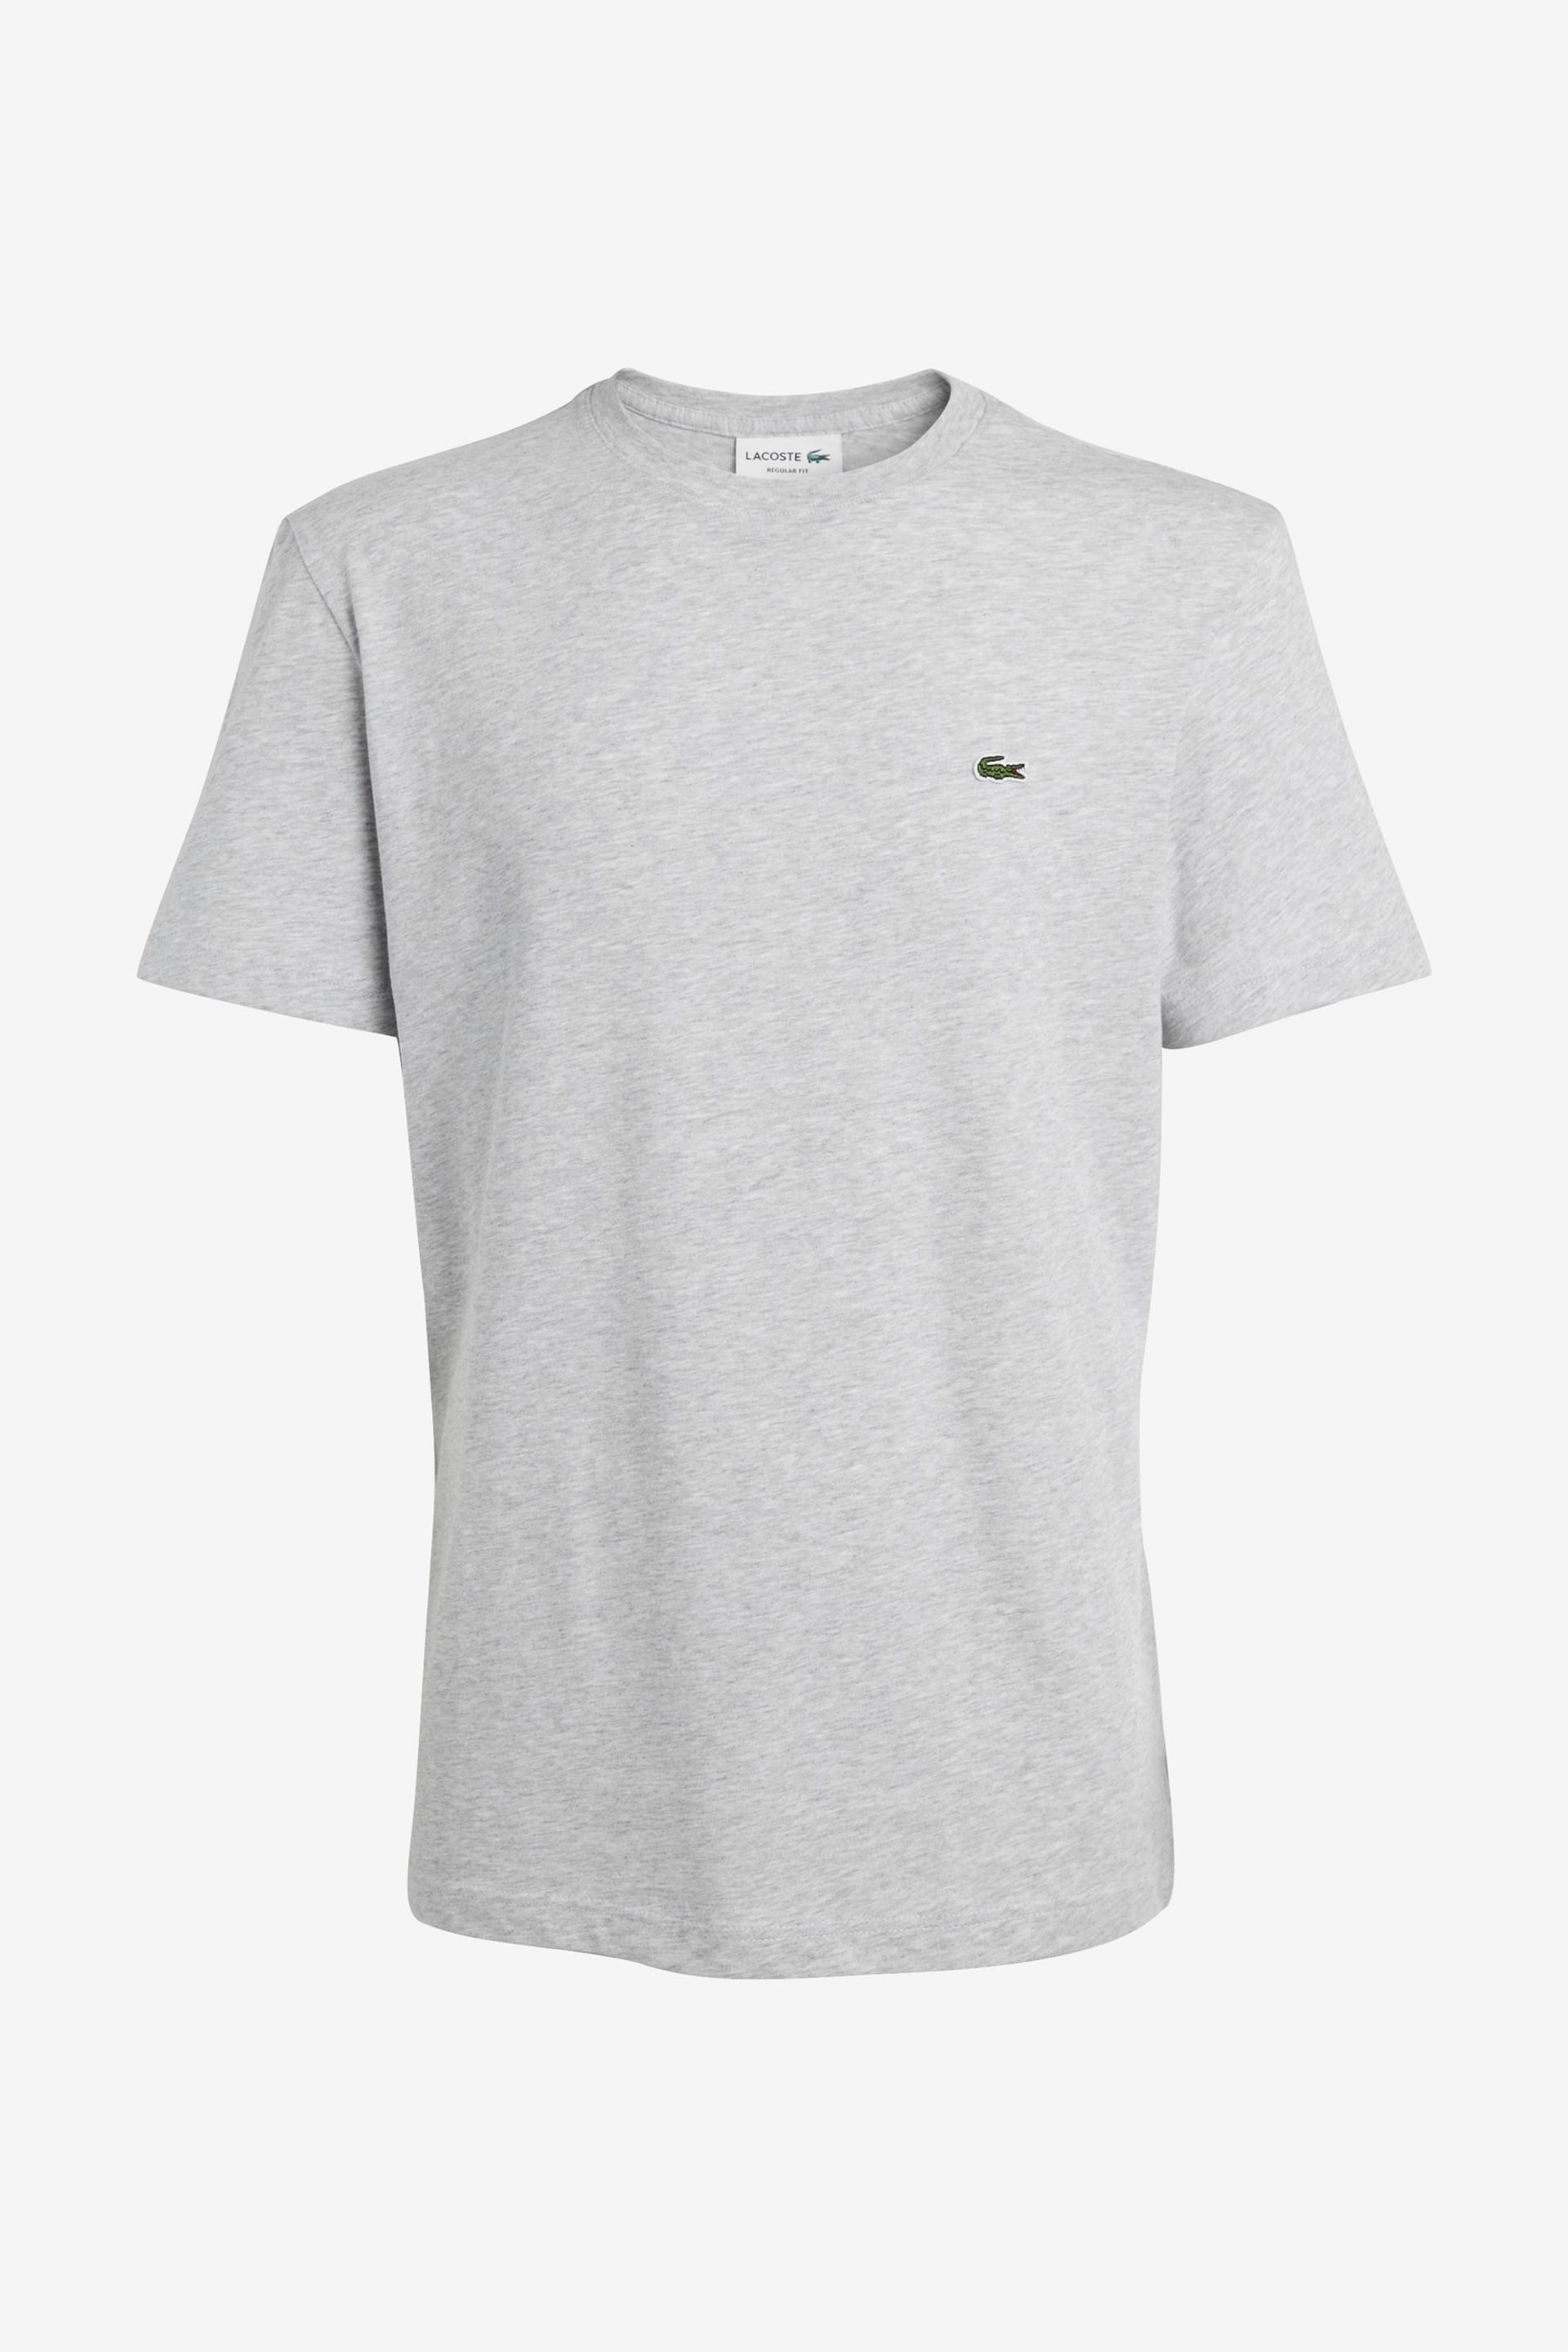 Lacoste Sports Regular Fit Cotton T-Shirt - Image 4 of 6